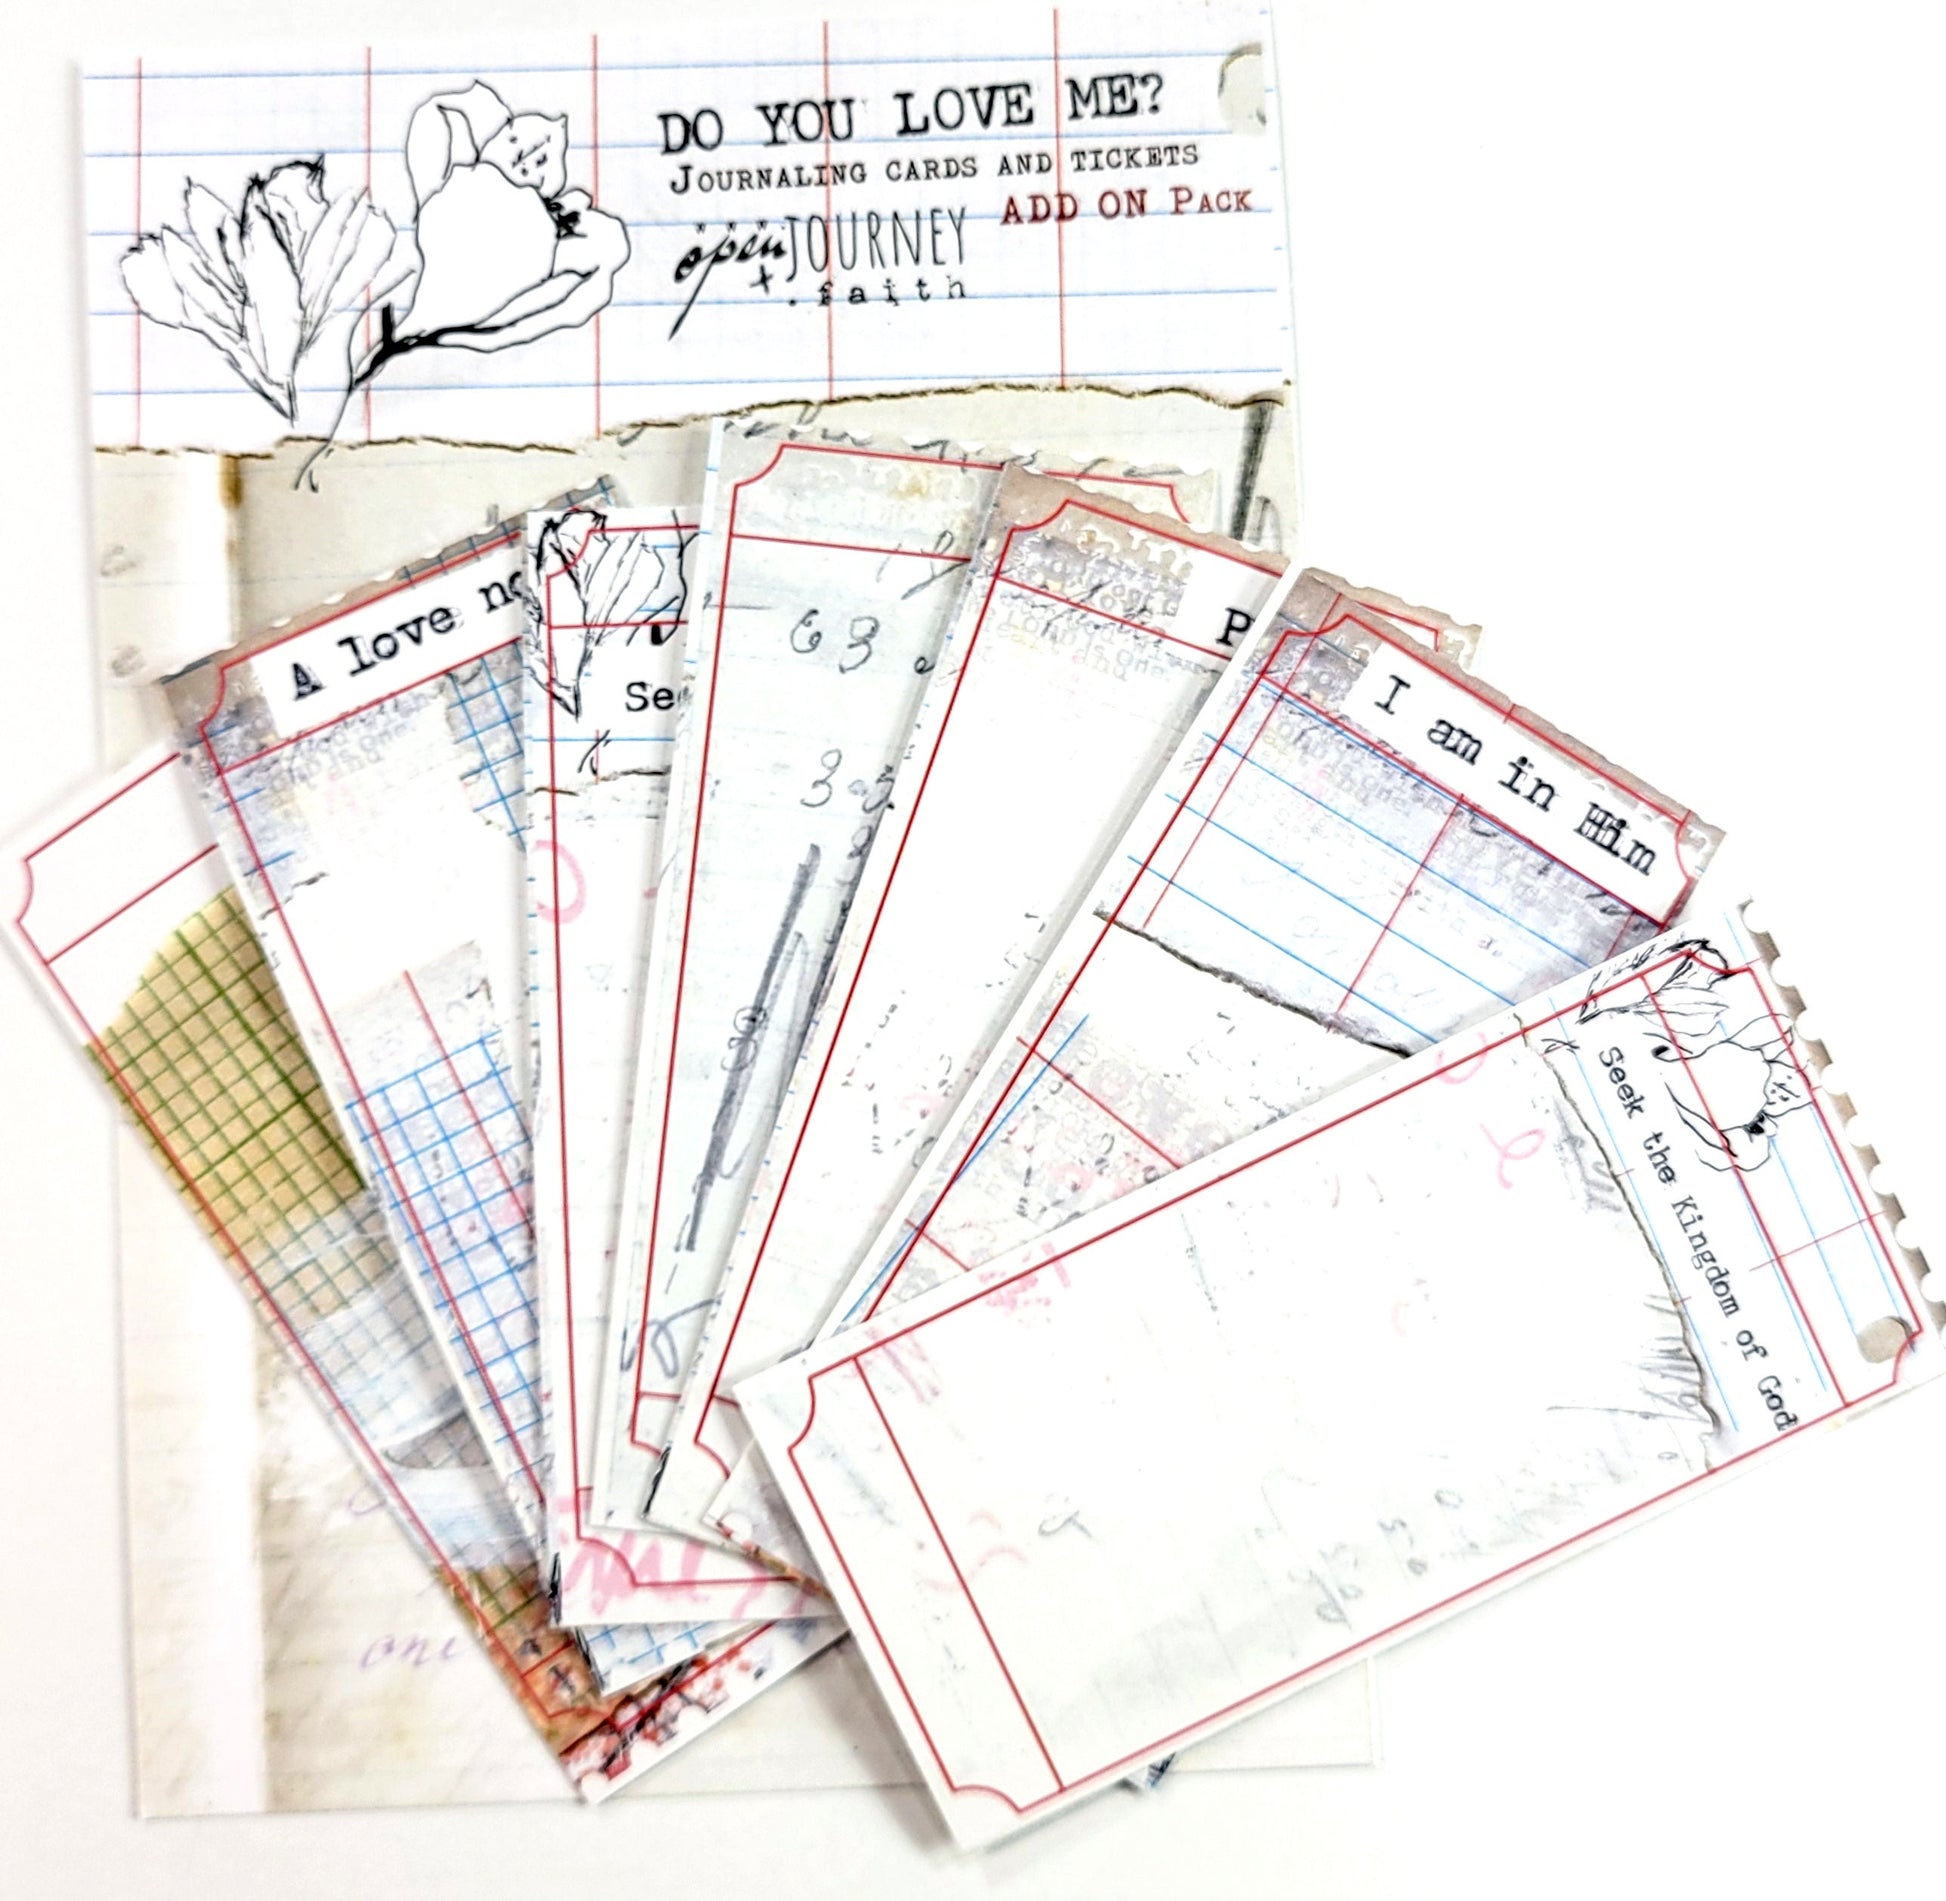 Do you love Me?- ADD ON journaling tickets